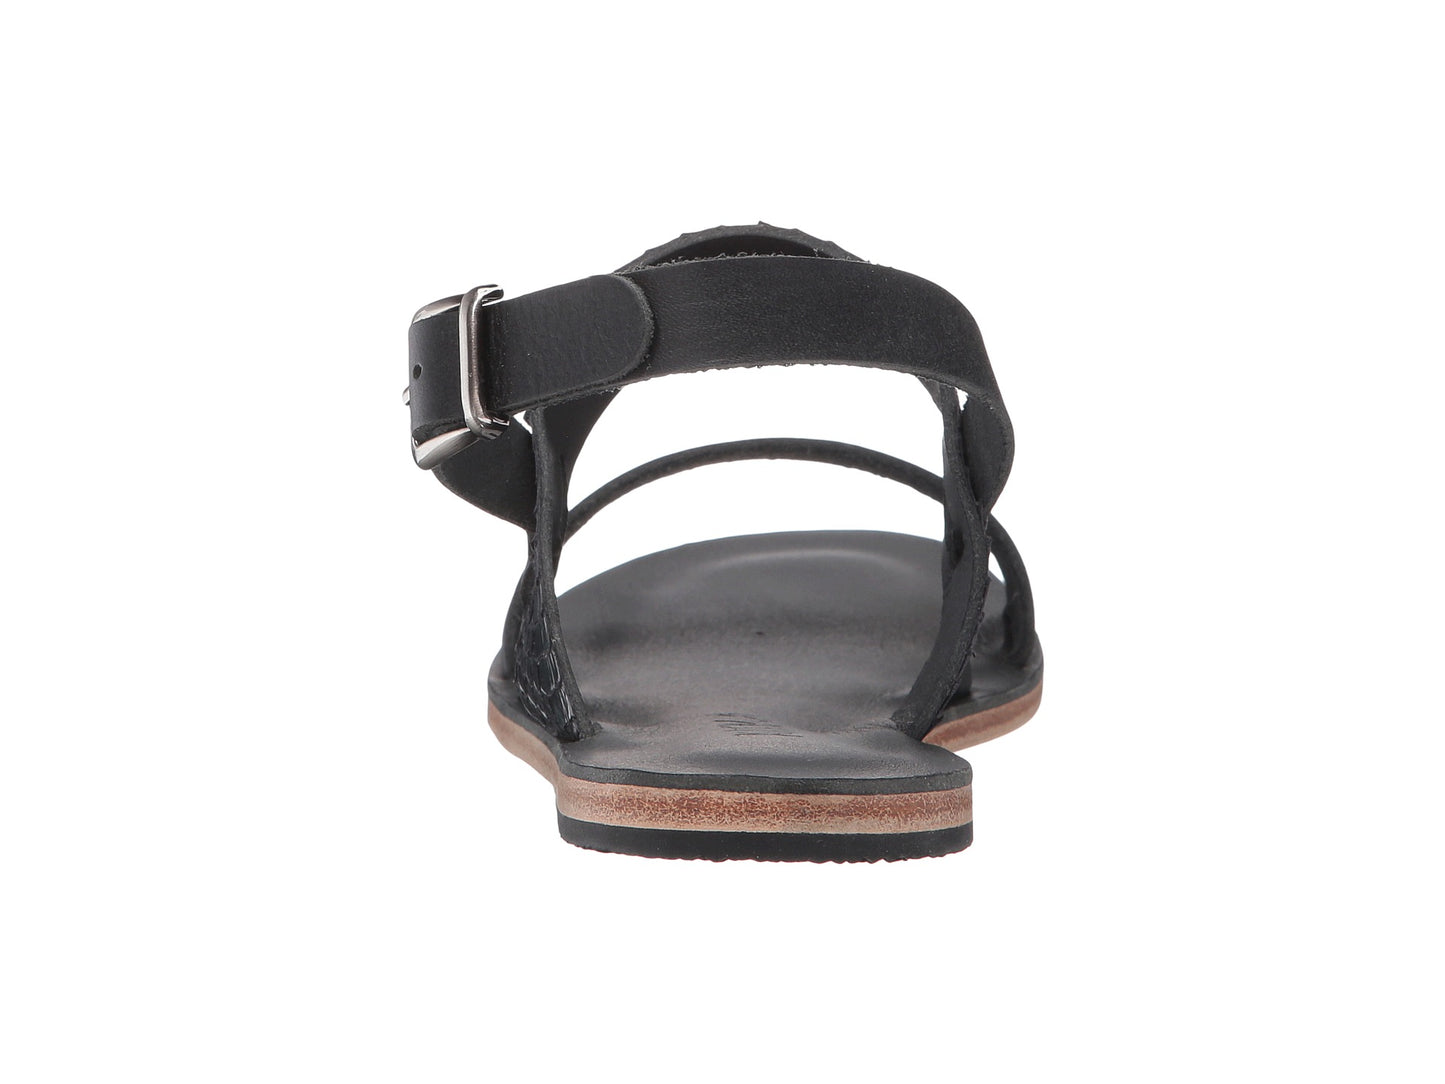 Abbot Kinney Blvd black snake skin, handmade leather buckle sandals with front loop - Back View